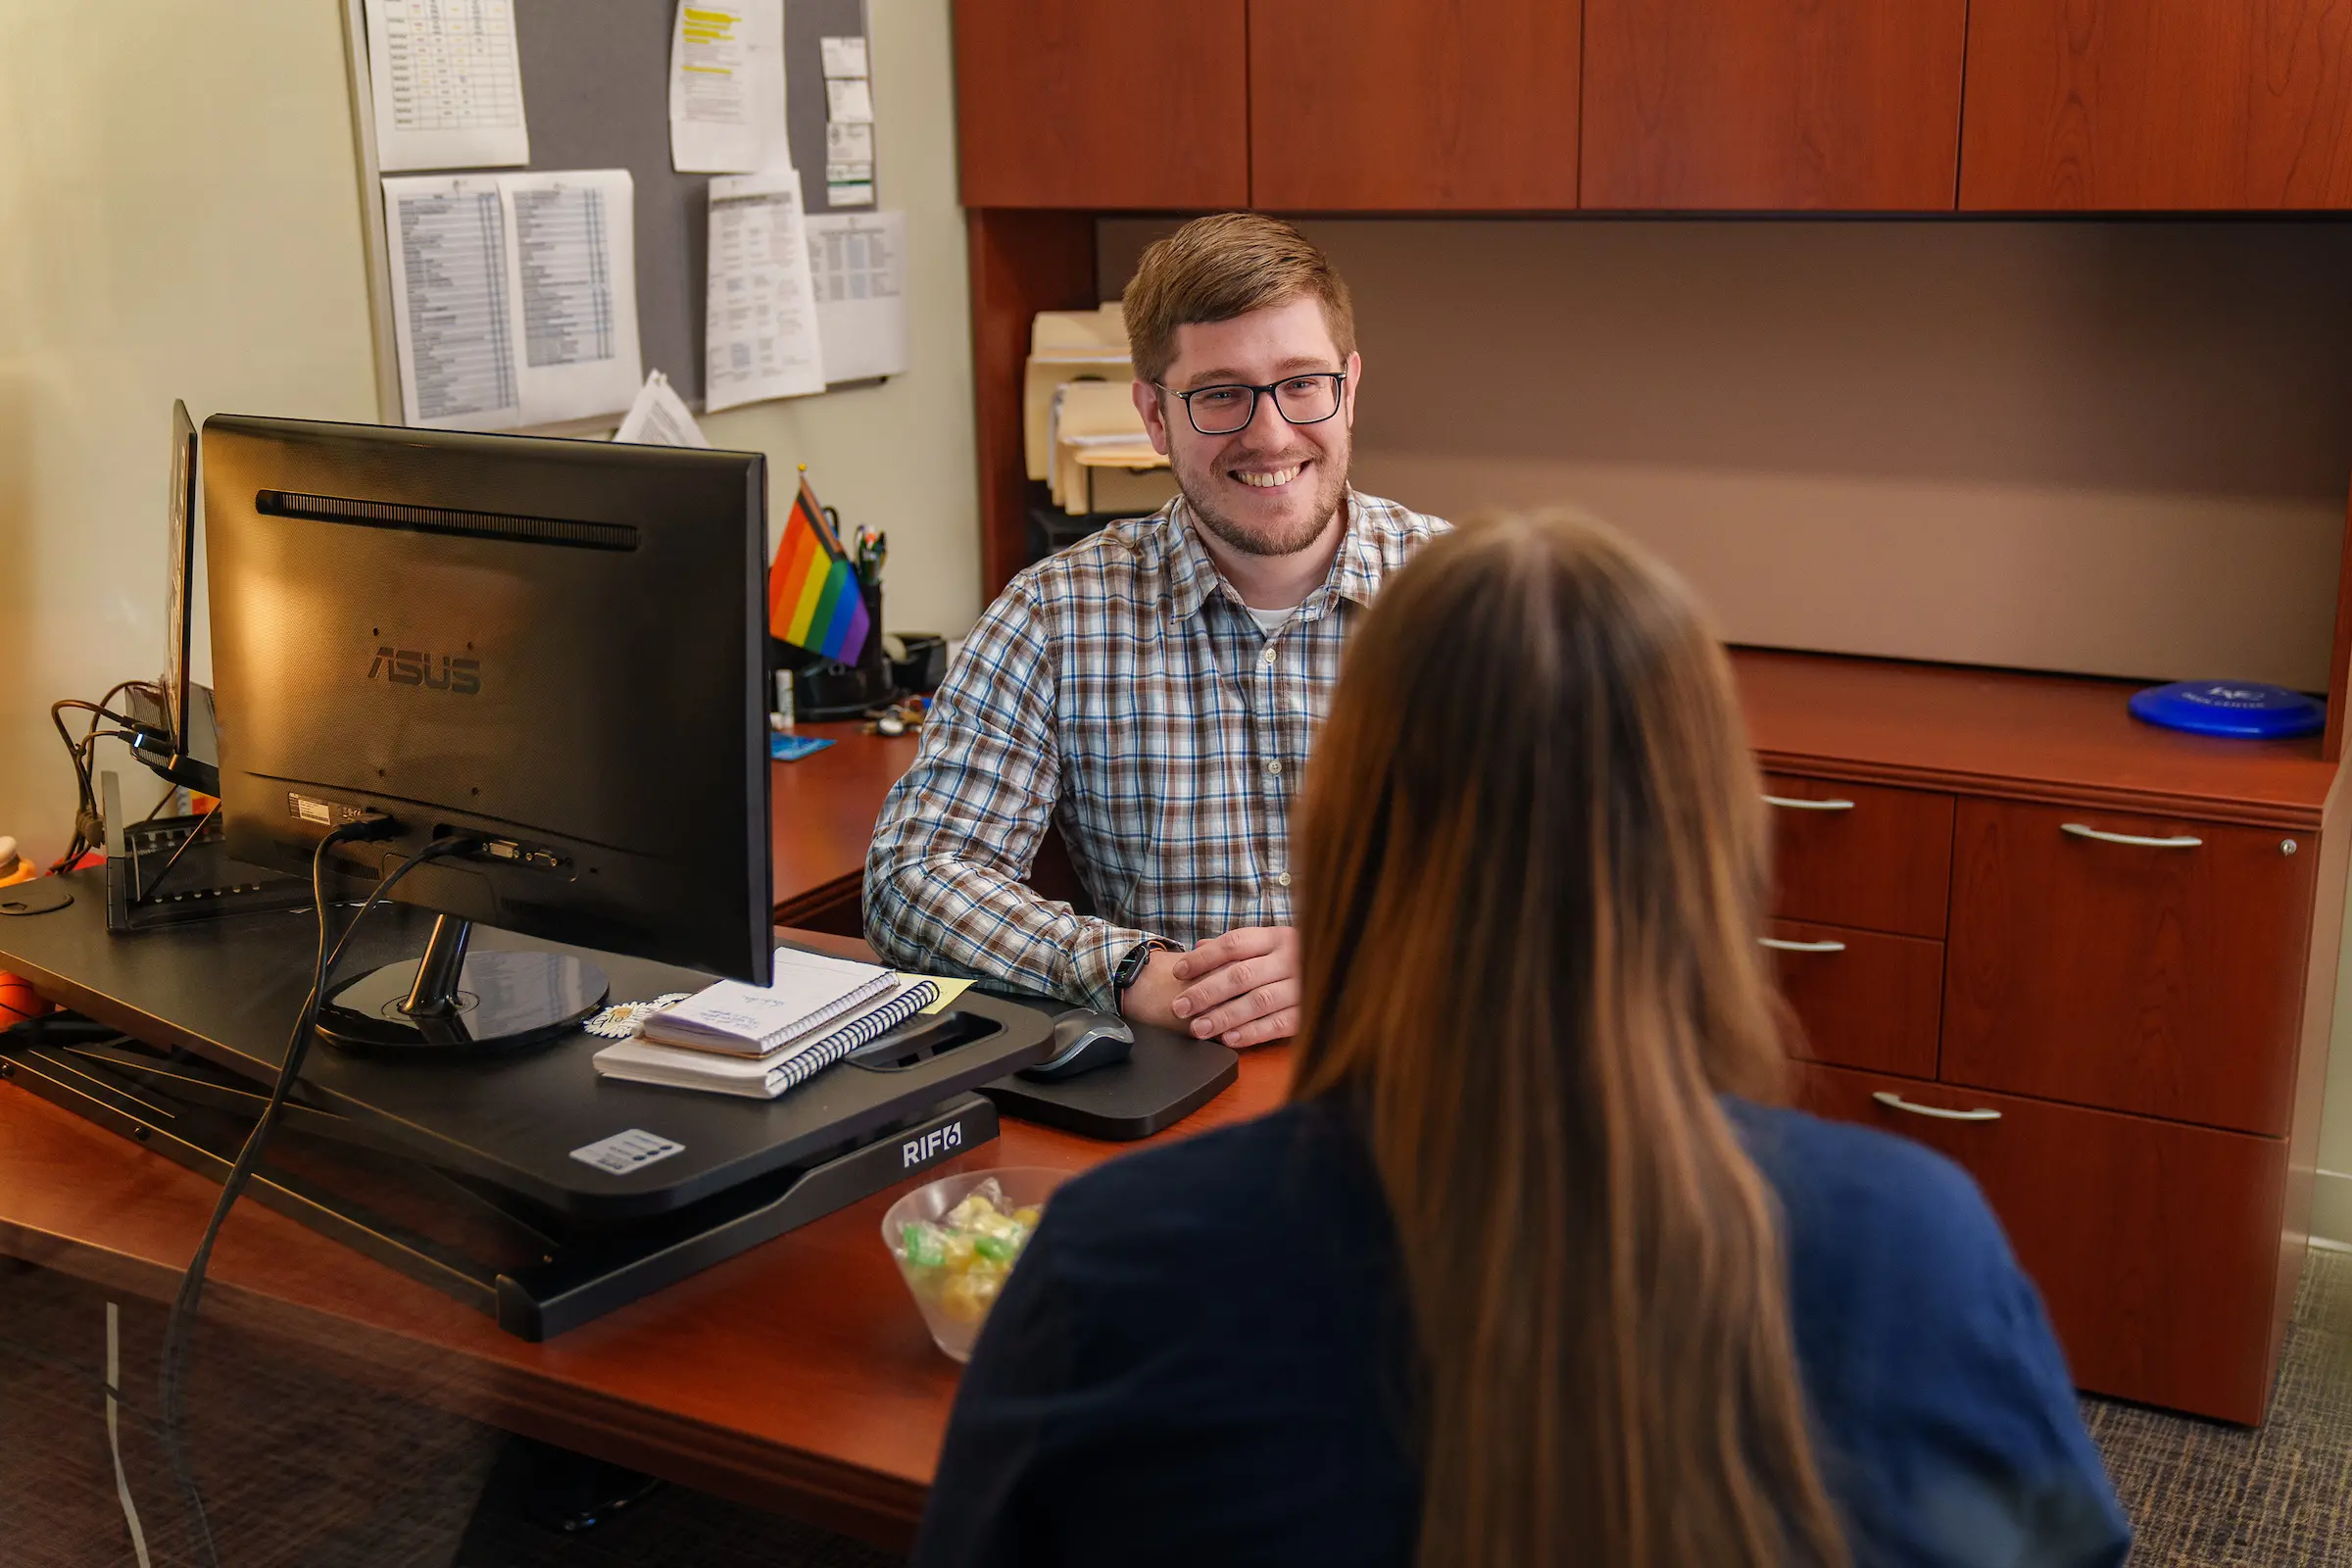 Student meets with Breen Center staff member